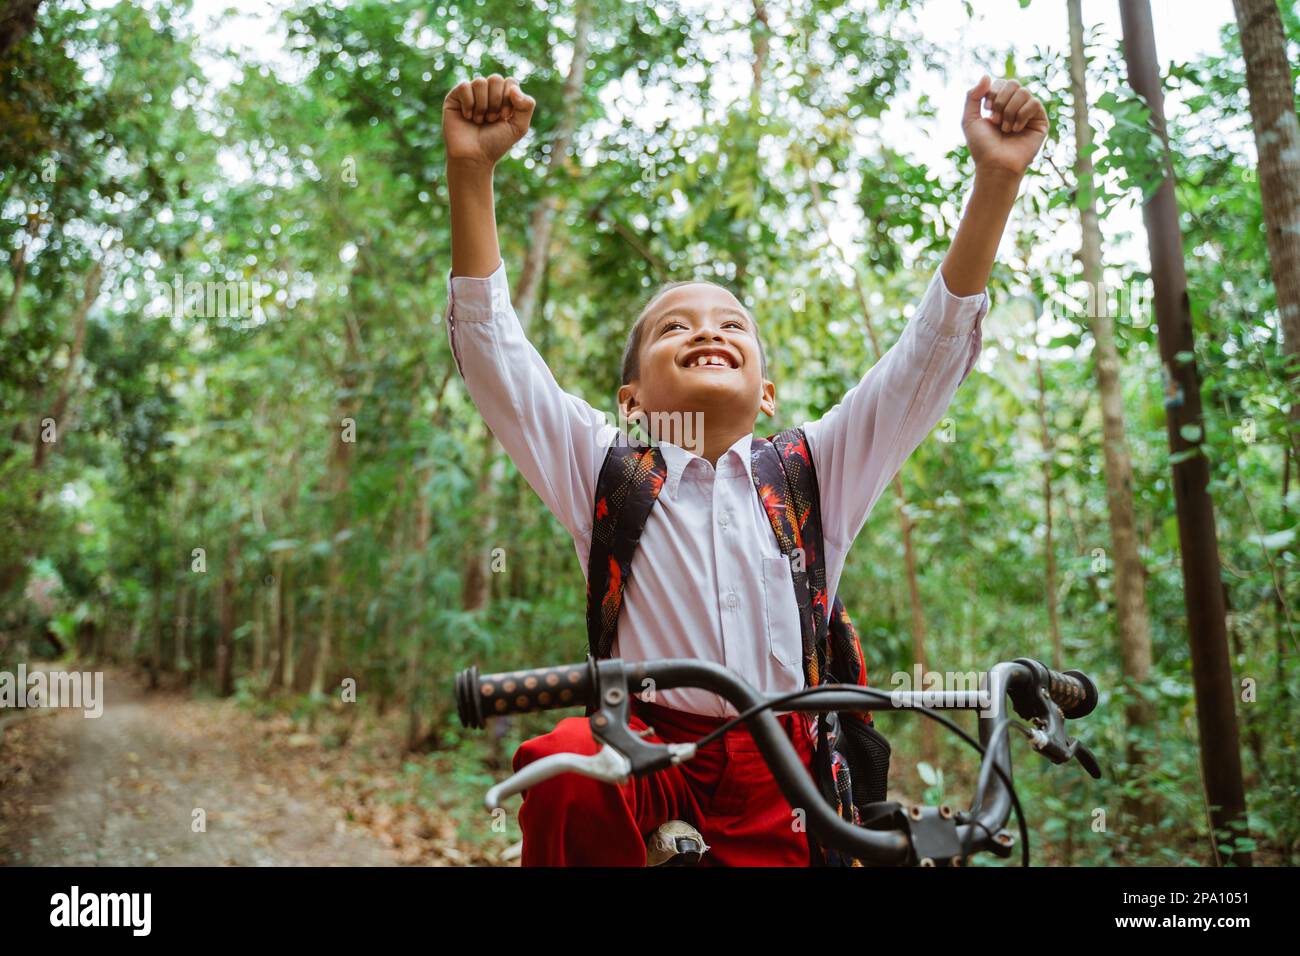 a male elementary student riding his bike and raised his hands Stock Photo